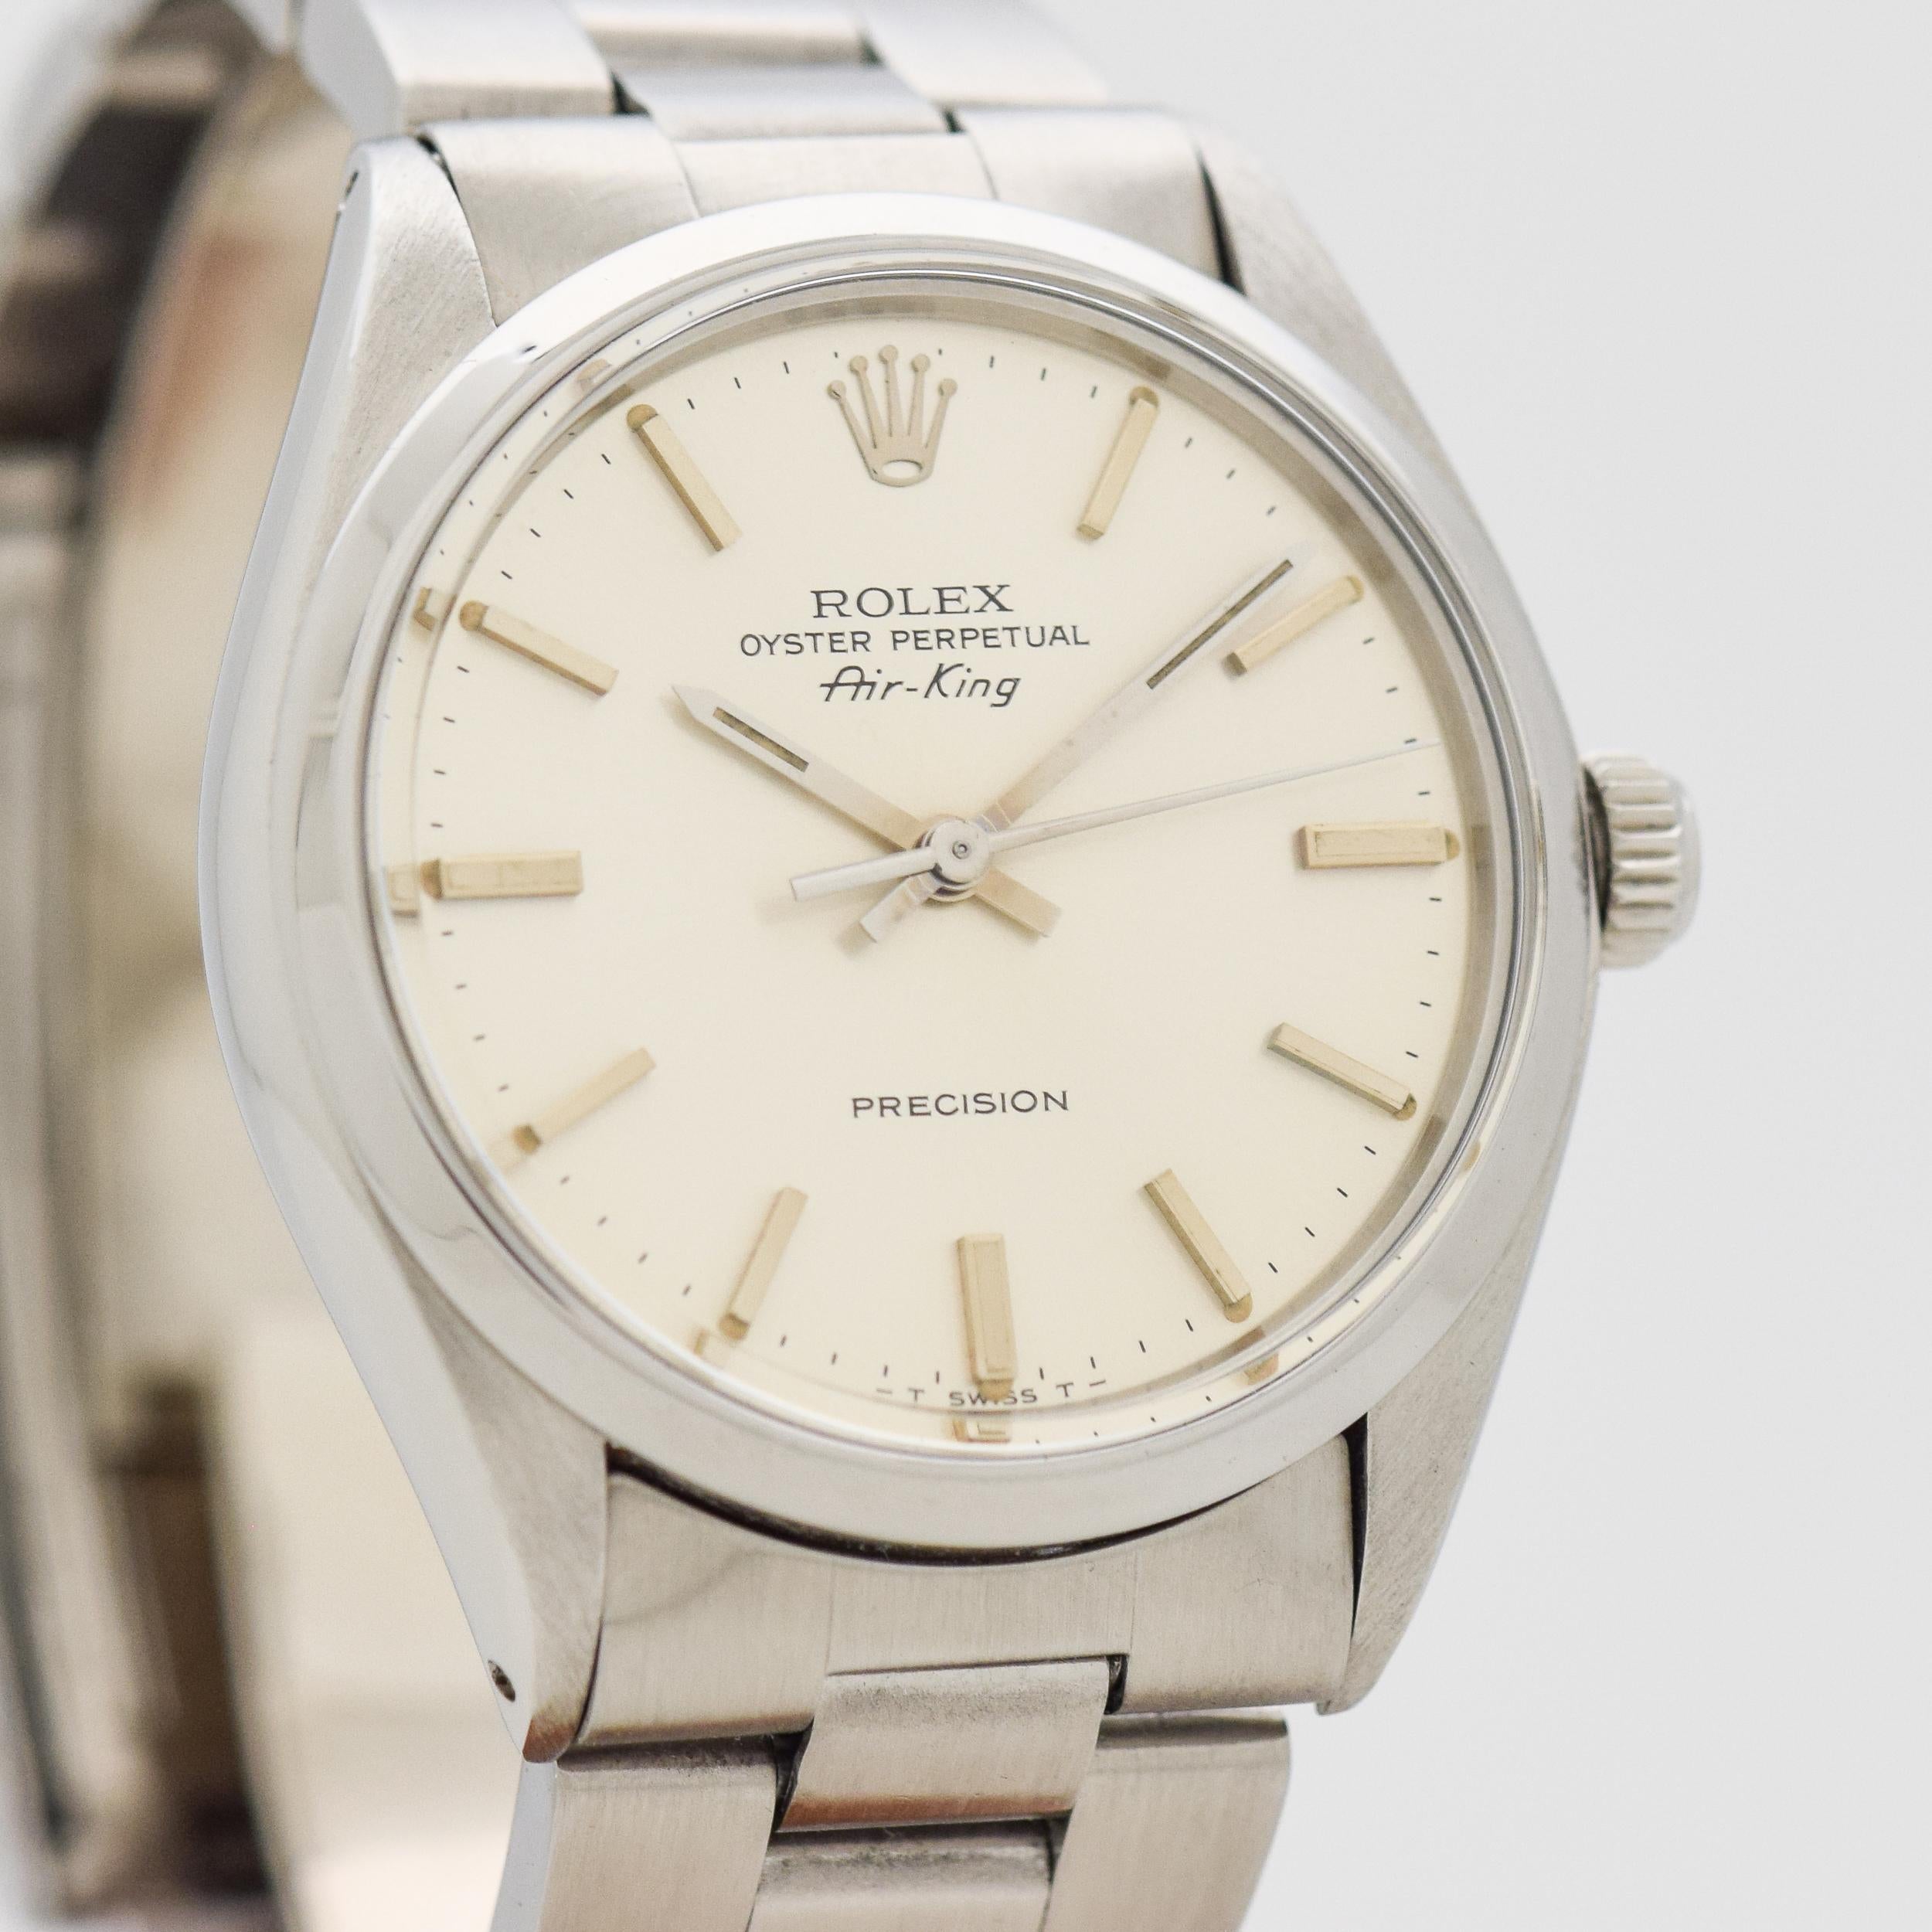 1979 Vintage Rolex Air-King Ref. 5500 Stainless Steel watch with Original Silver Dial with Applied Steel Stick/Bar/Baton Markers with Original Rolex Stainless Steel Oyster Bracelet. 34mm x 39mm lug to lug (1.34 in. x 1.54 in.) - 26 jewel, automatic